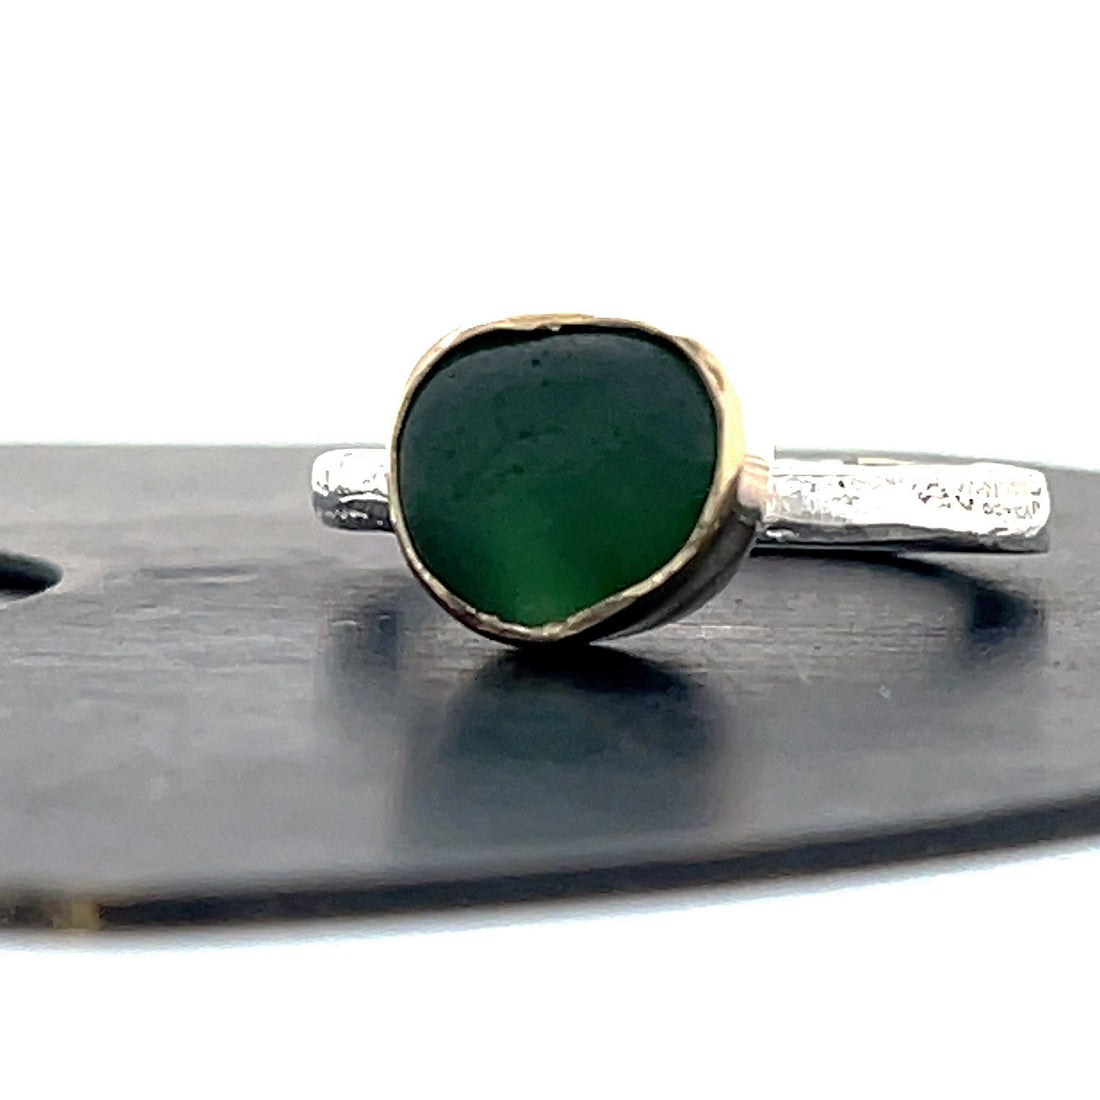 green seaglass set in gold bezelsilver ring